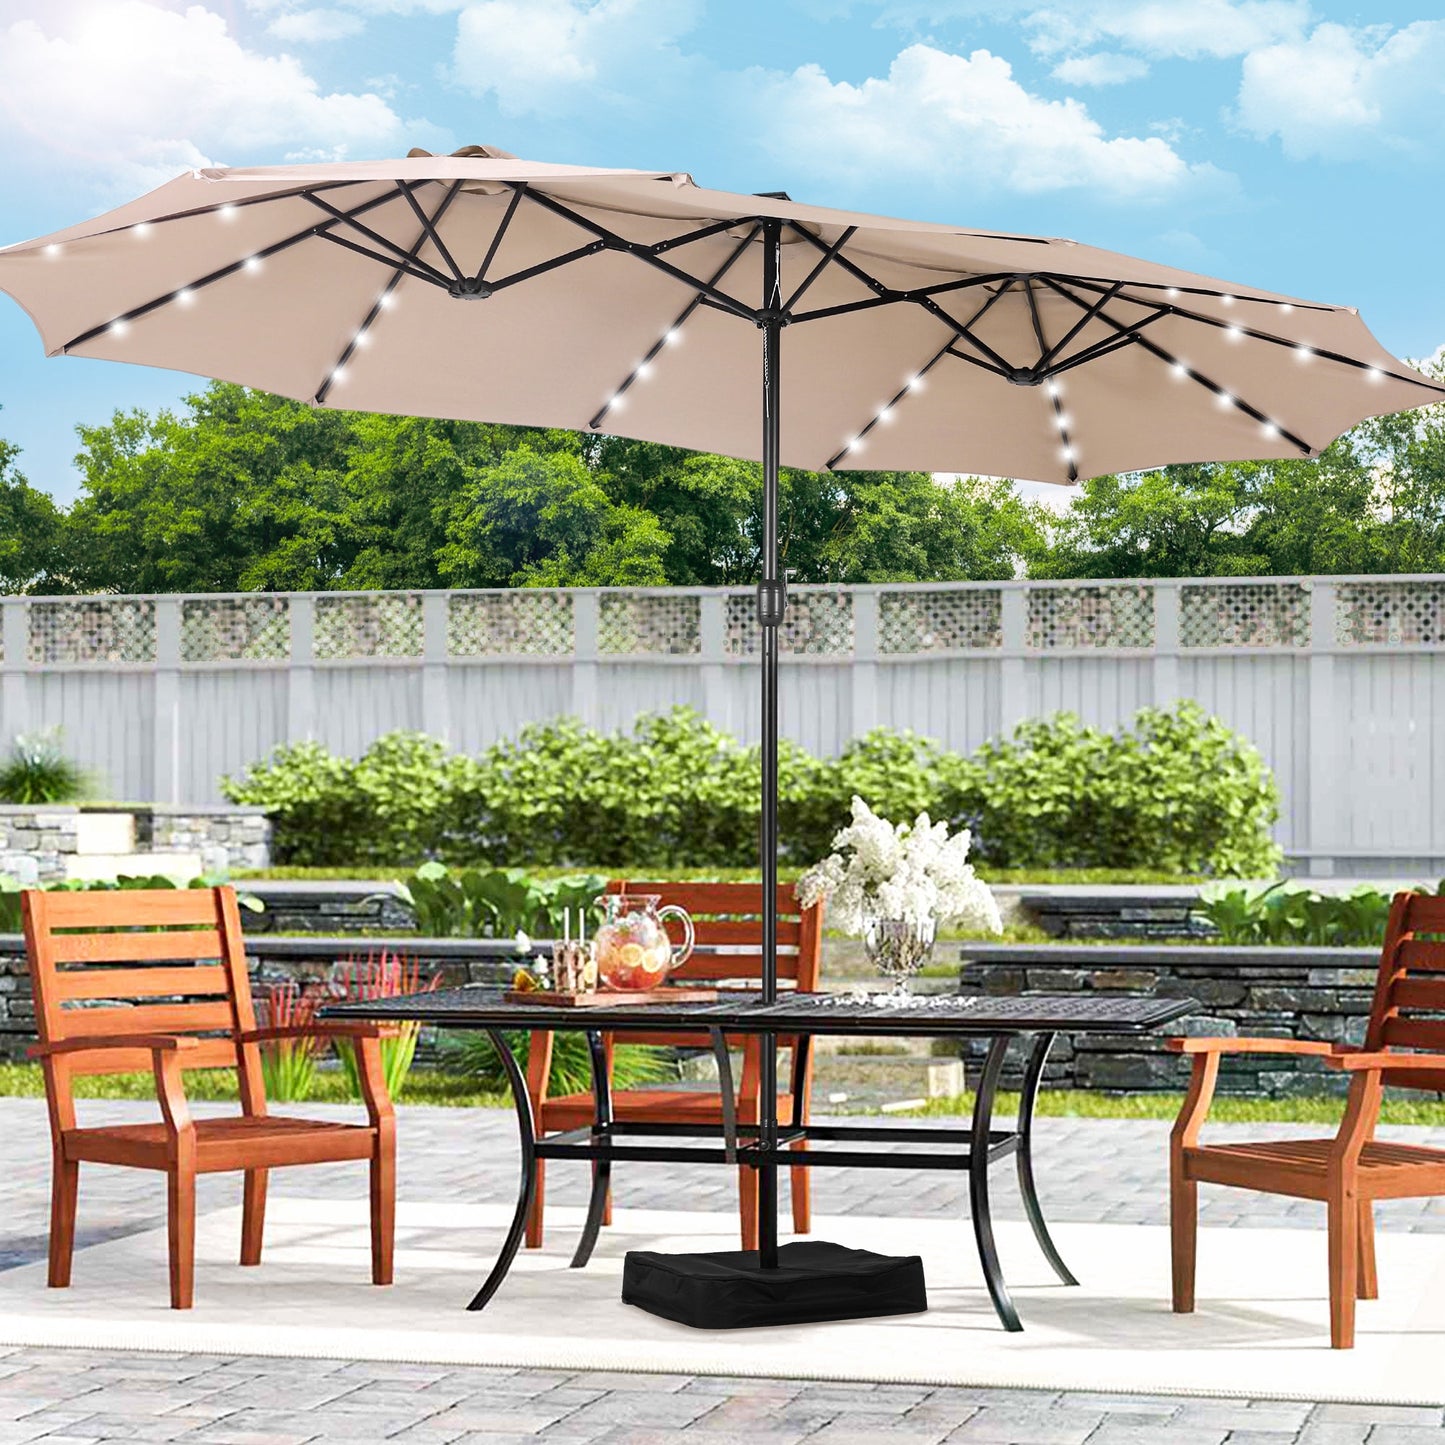 15ft Extra Large Outdoor Patio Double-Sided Umbrella with Solar Lights & Umbrella Base, Beige